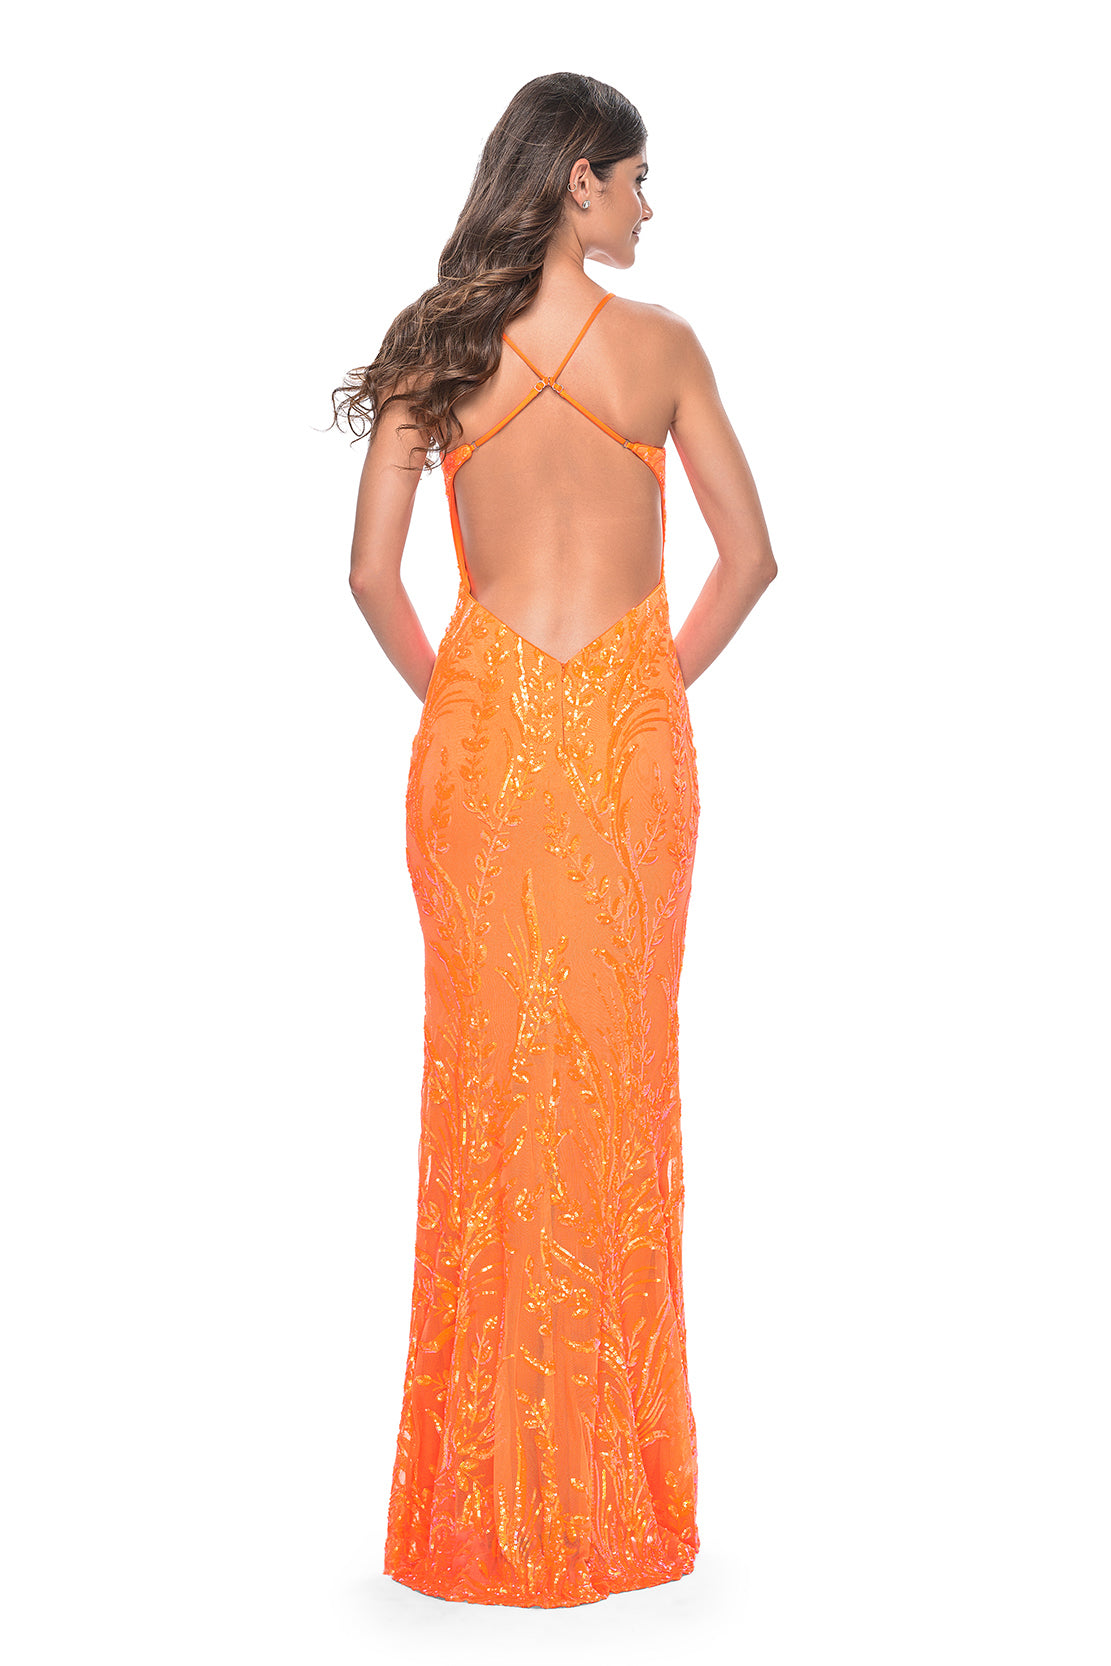 La Femme 31944 Leaf Print Sequin Prom Dress - An eye-catching prom dress featuring a print sequin fabric with a leaf design, V neckline, and open back for a unique and captivating look. The model is wearing the dress in the color orange.